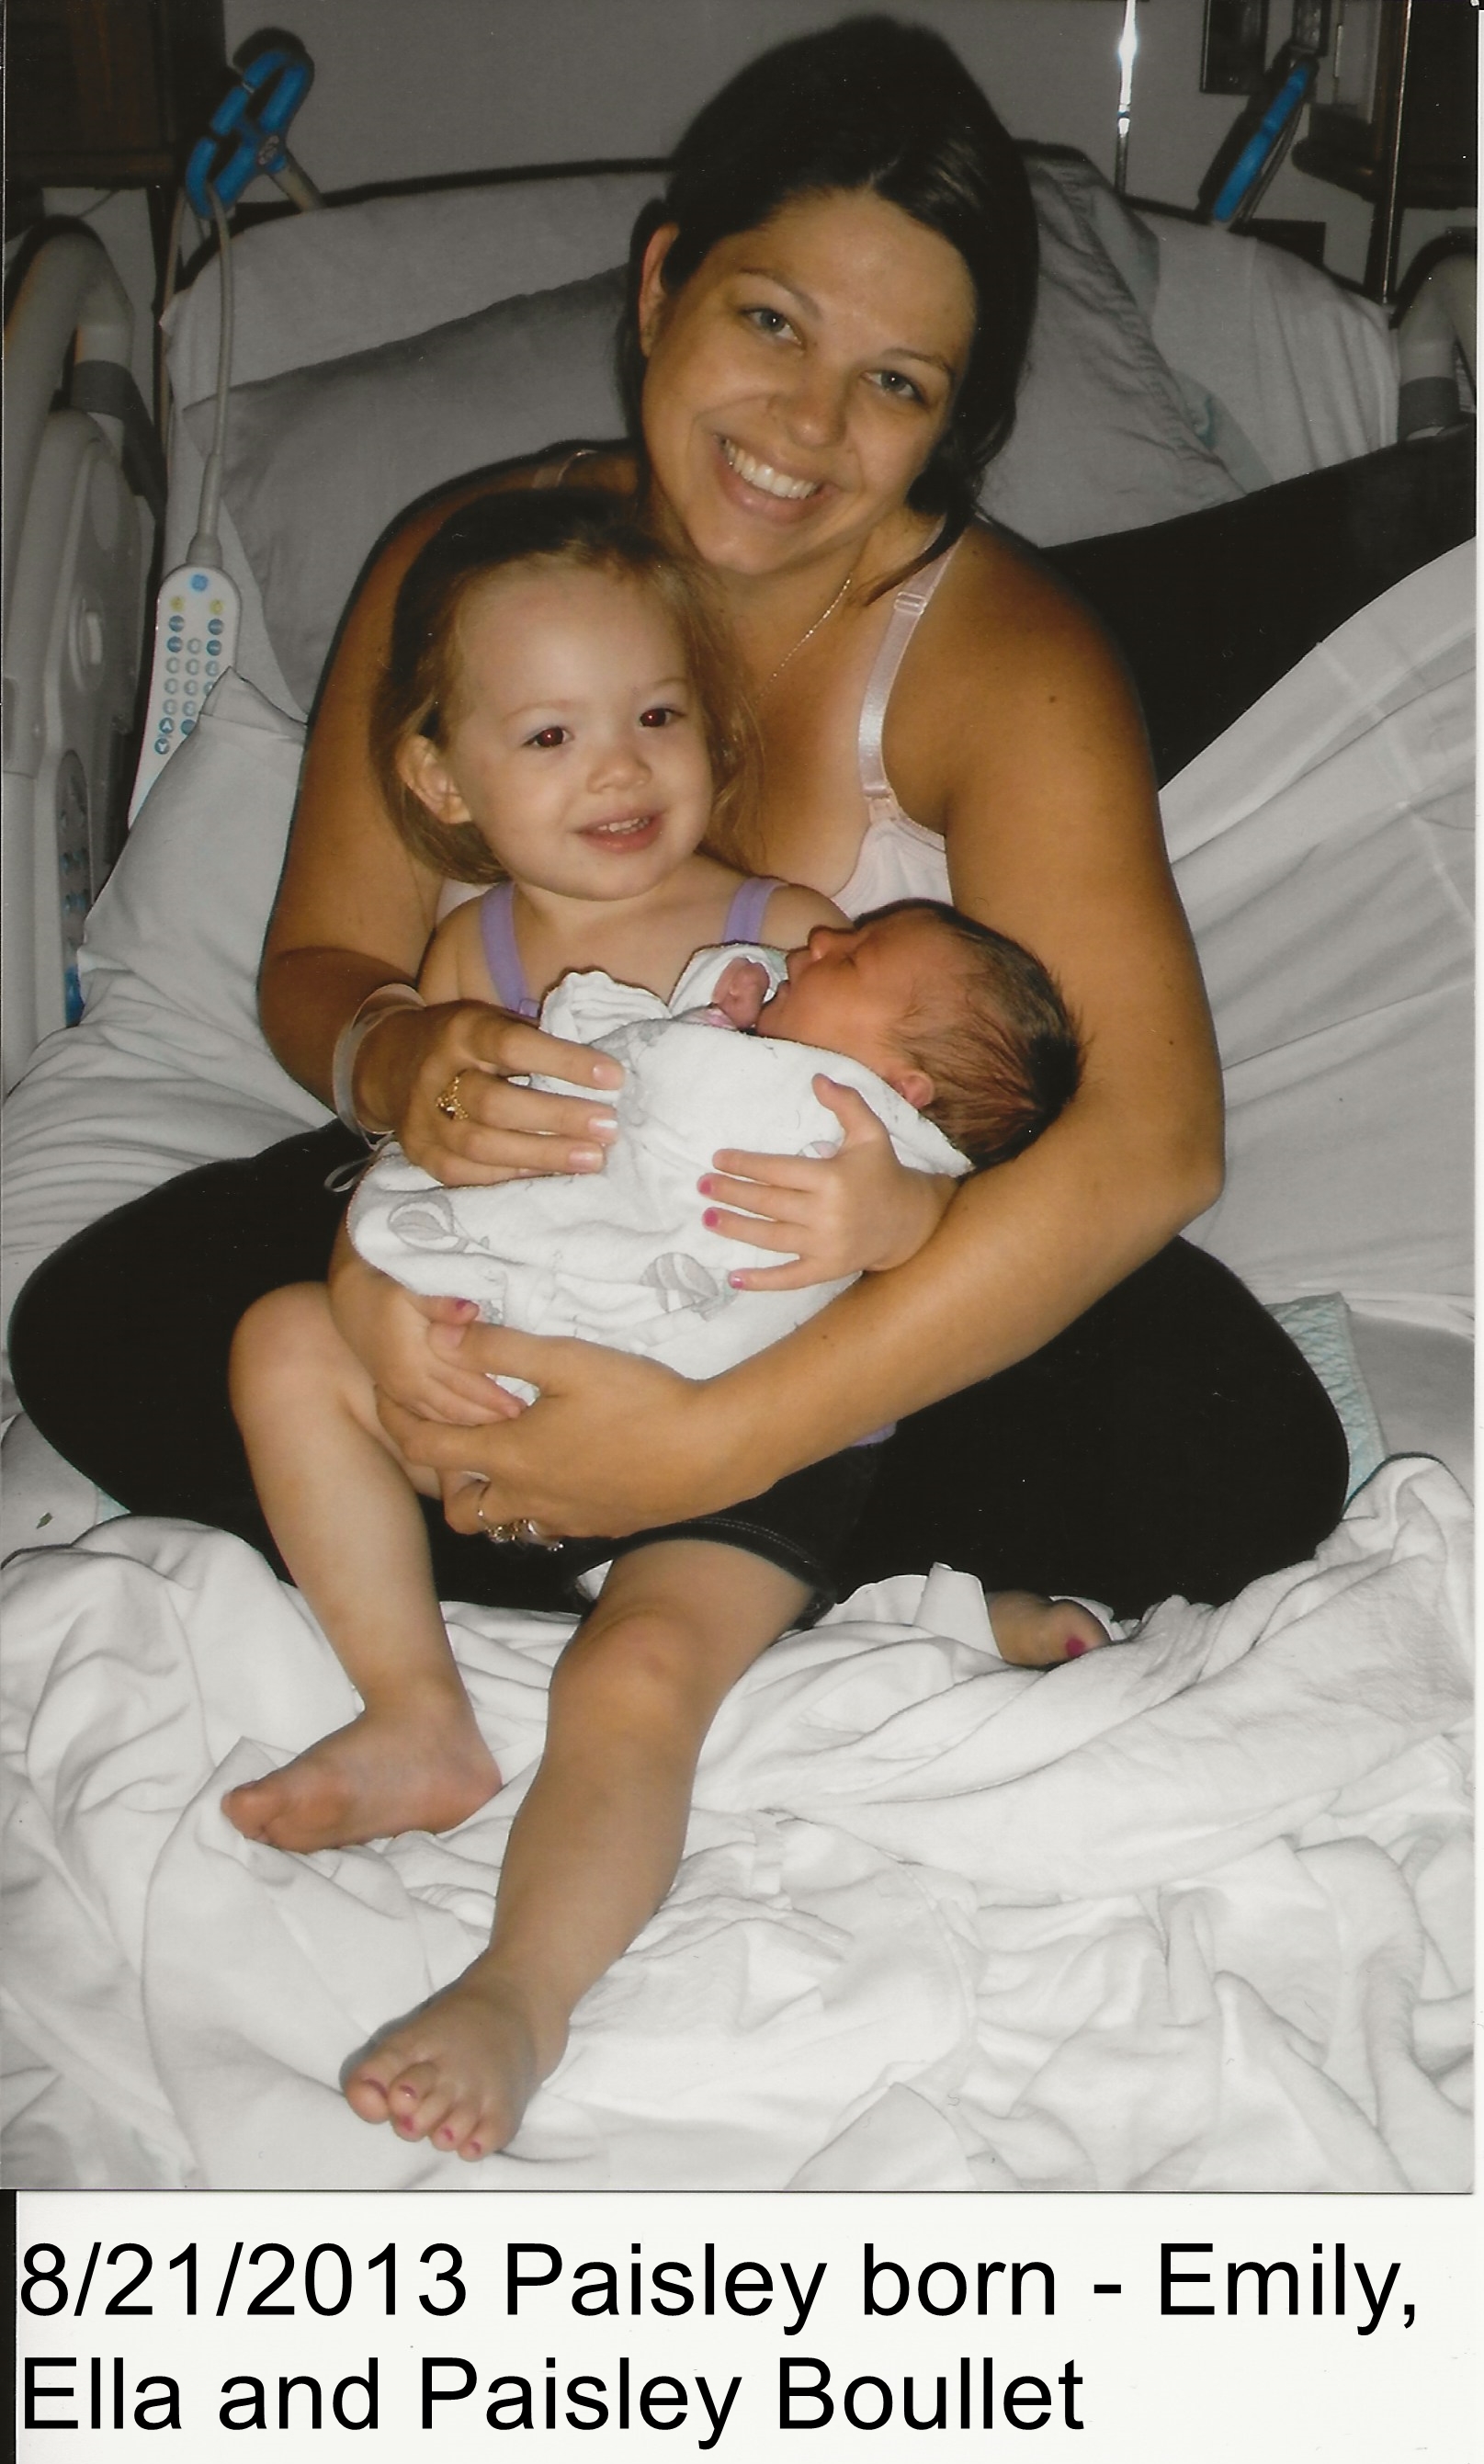 August 21, 2013 birth of Paisley - Emily and Ella holding Paisley Boullet in hospital.